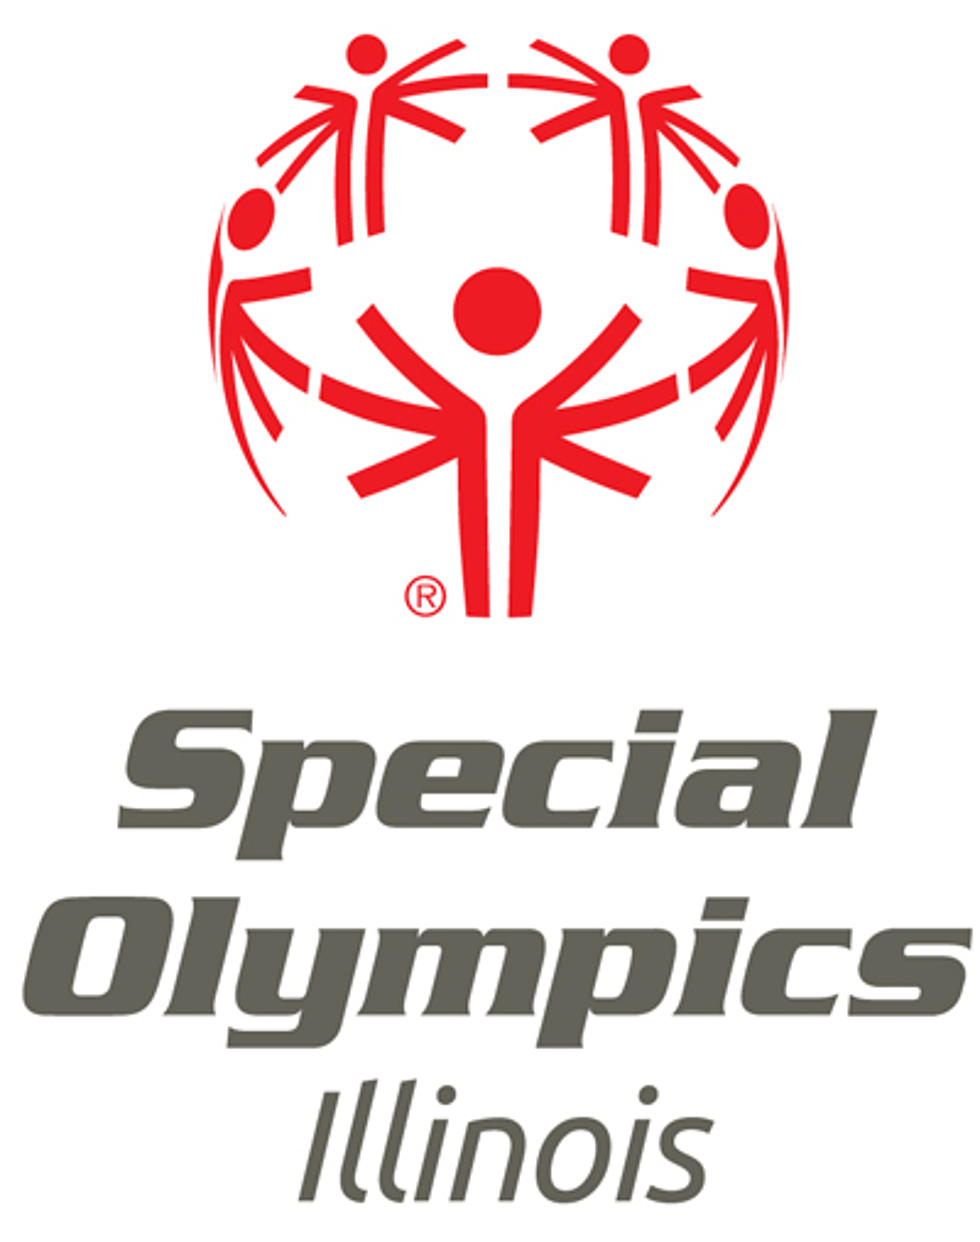 Rockford Athlete on Her Way to Special Olympics World Games